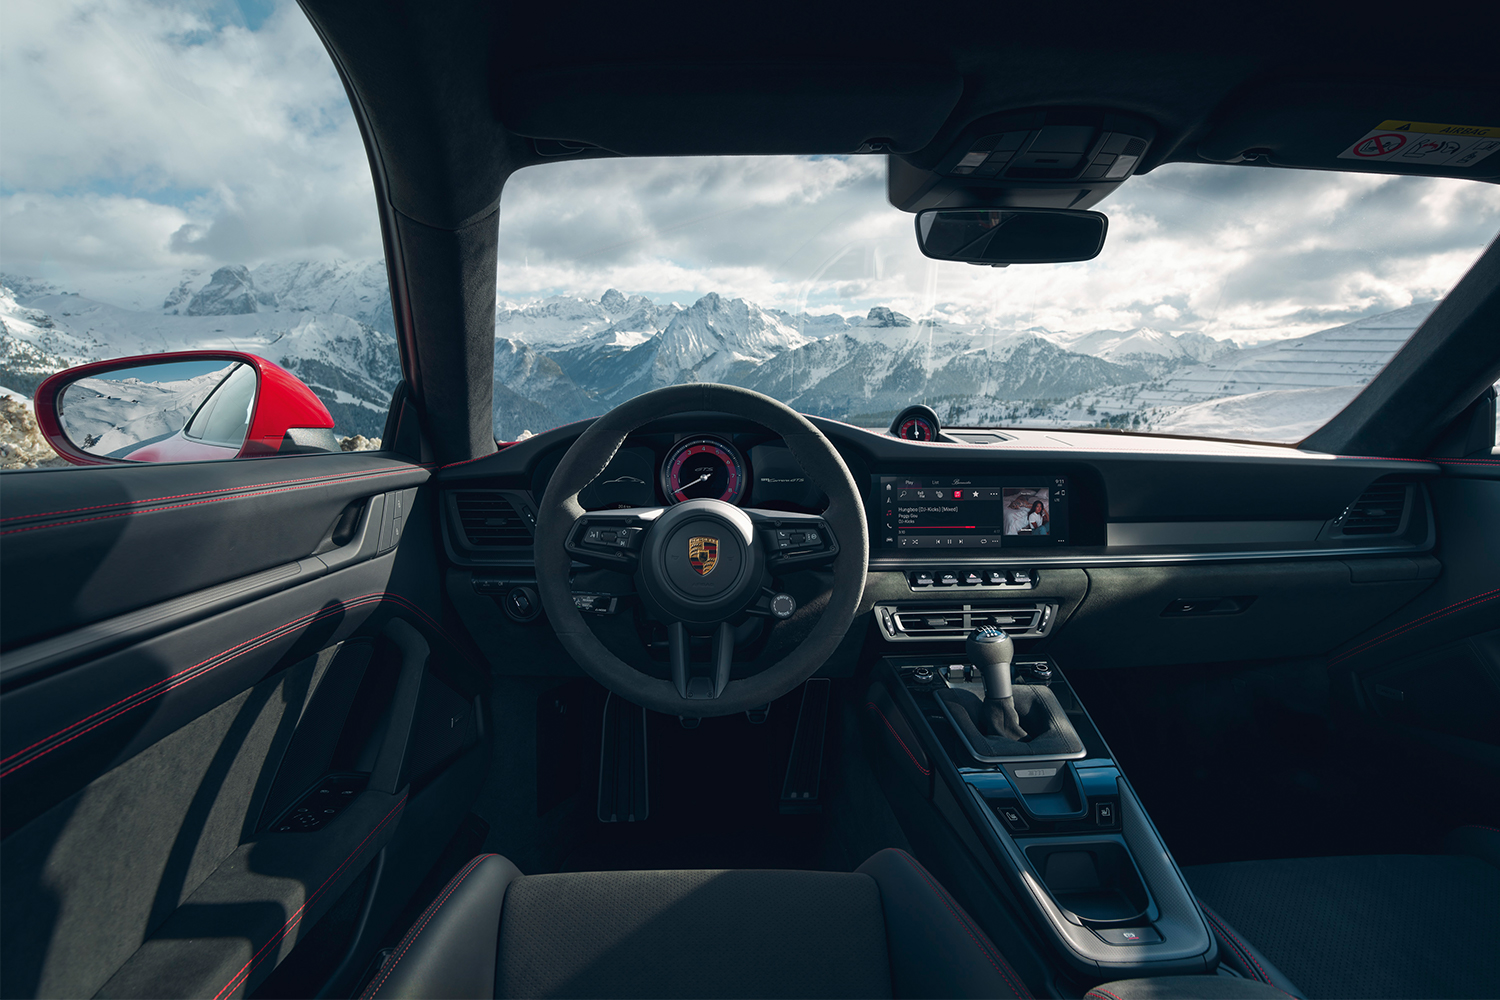 The interior of a 2022 Porsche 911 Carrera GTS with mountains in the background